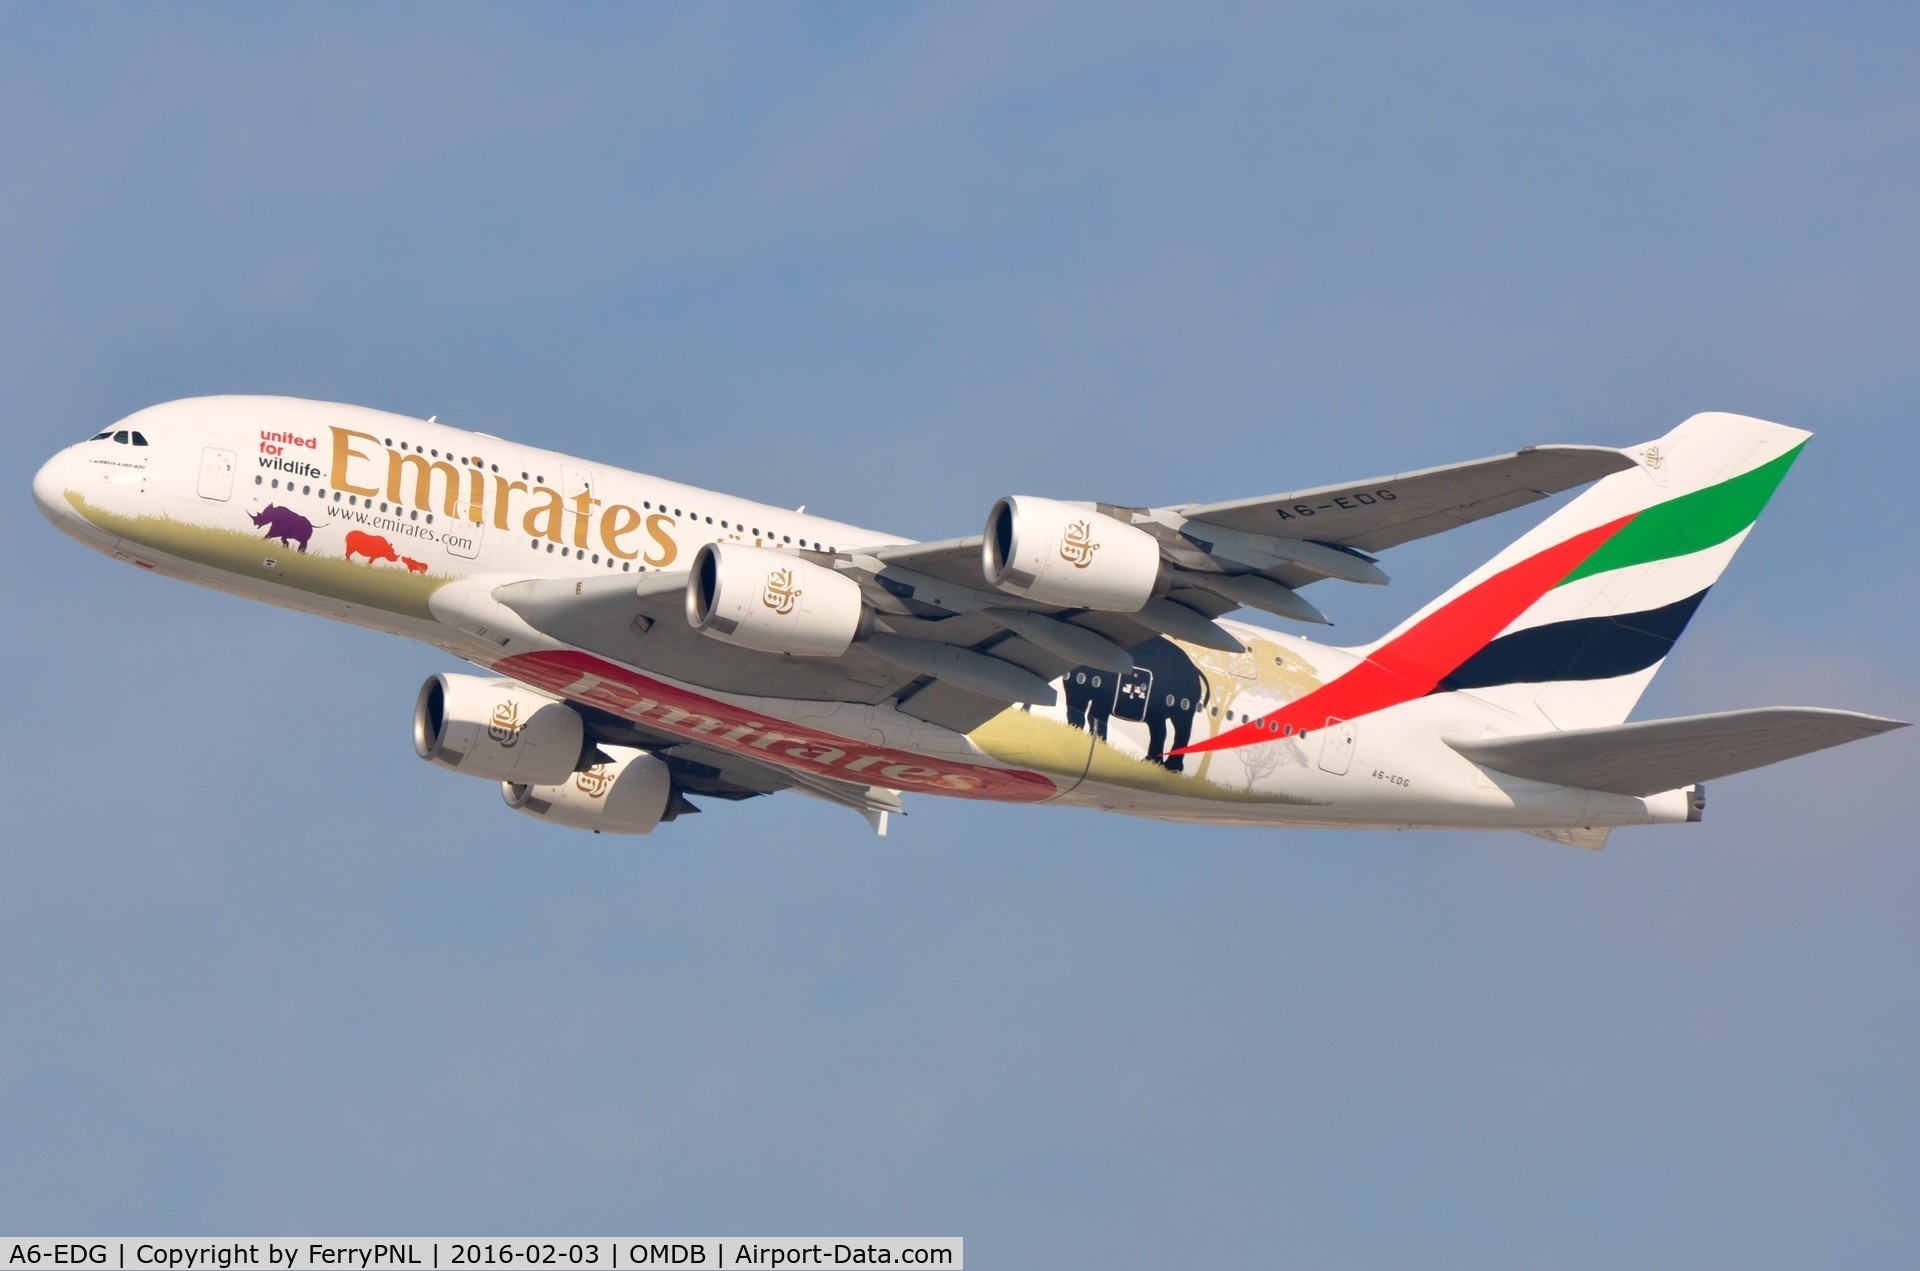 A6-EDG, 2009 Airbus A380-861 C/N 023, Emirates helps protecting the wildlife.